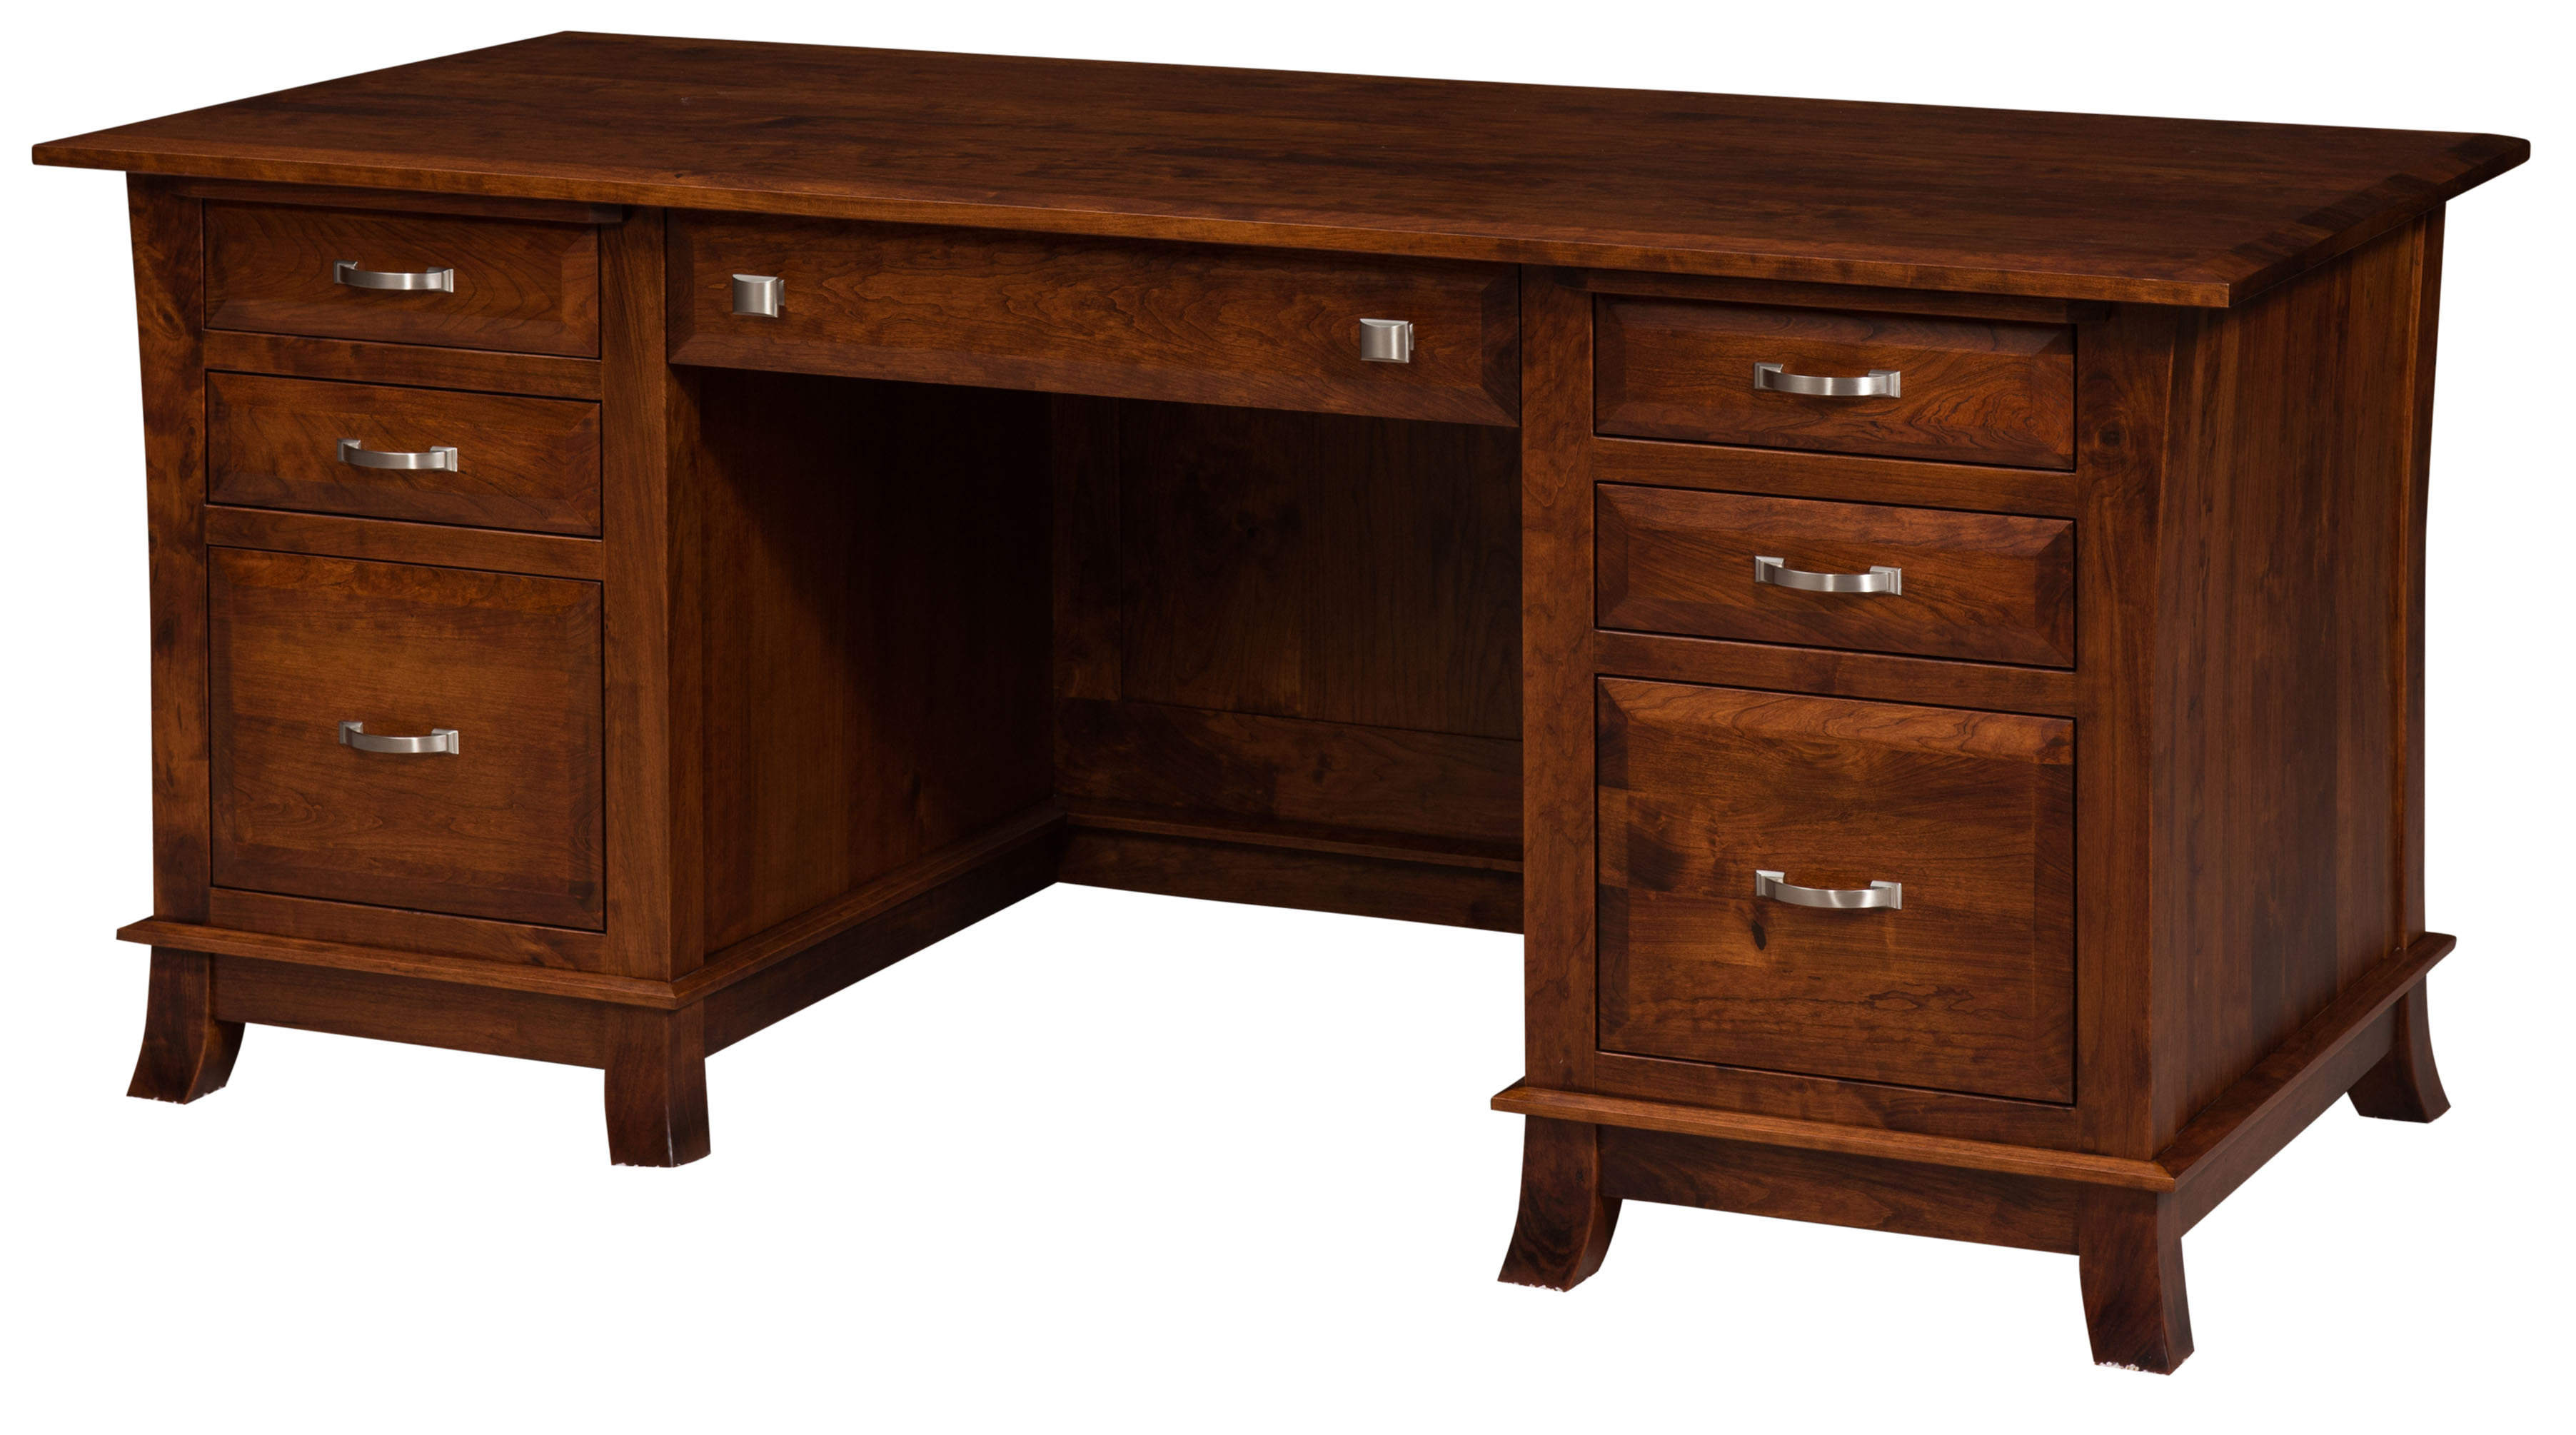 Hampton Executive Desk For 2 870 00 In Office Amish Furniture